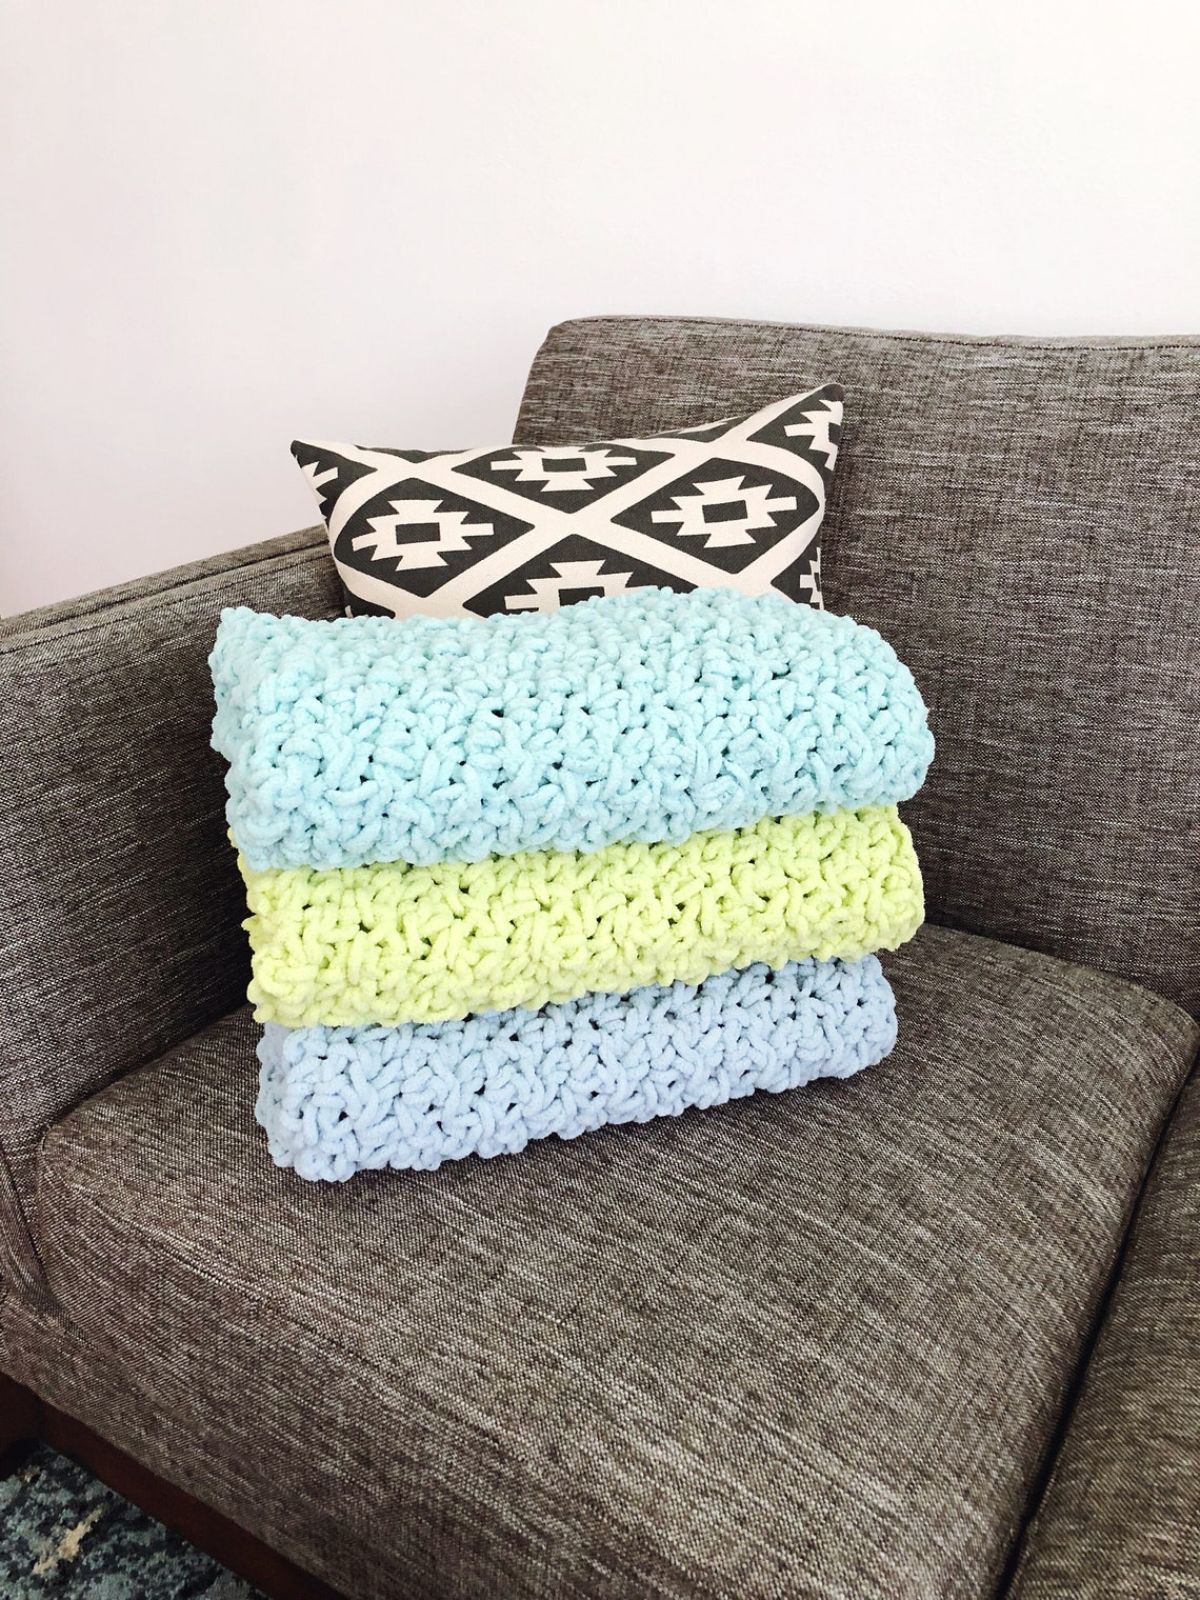 Three skein style crochet blankets folded on top of each other on a grey sofa. The blankets are gray, yellow, and light blue.